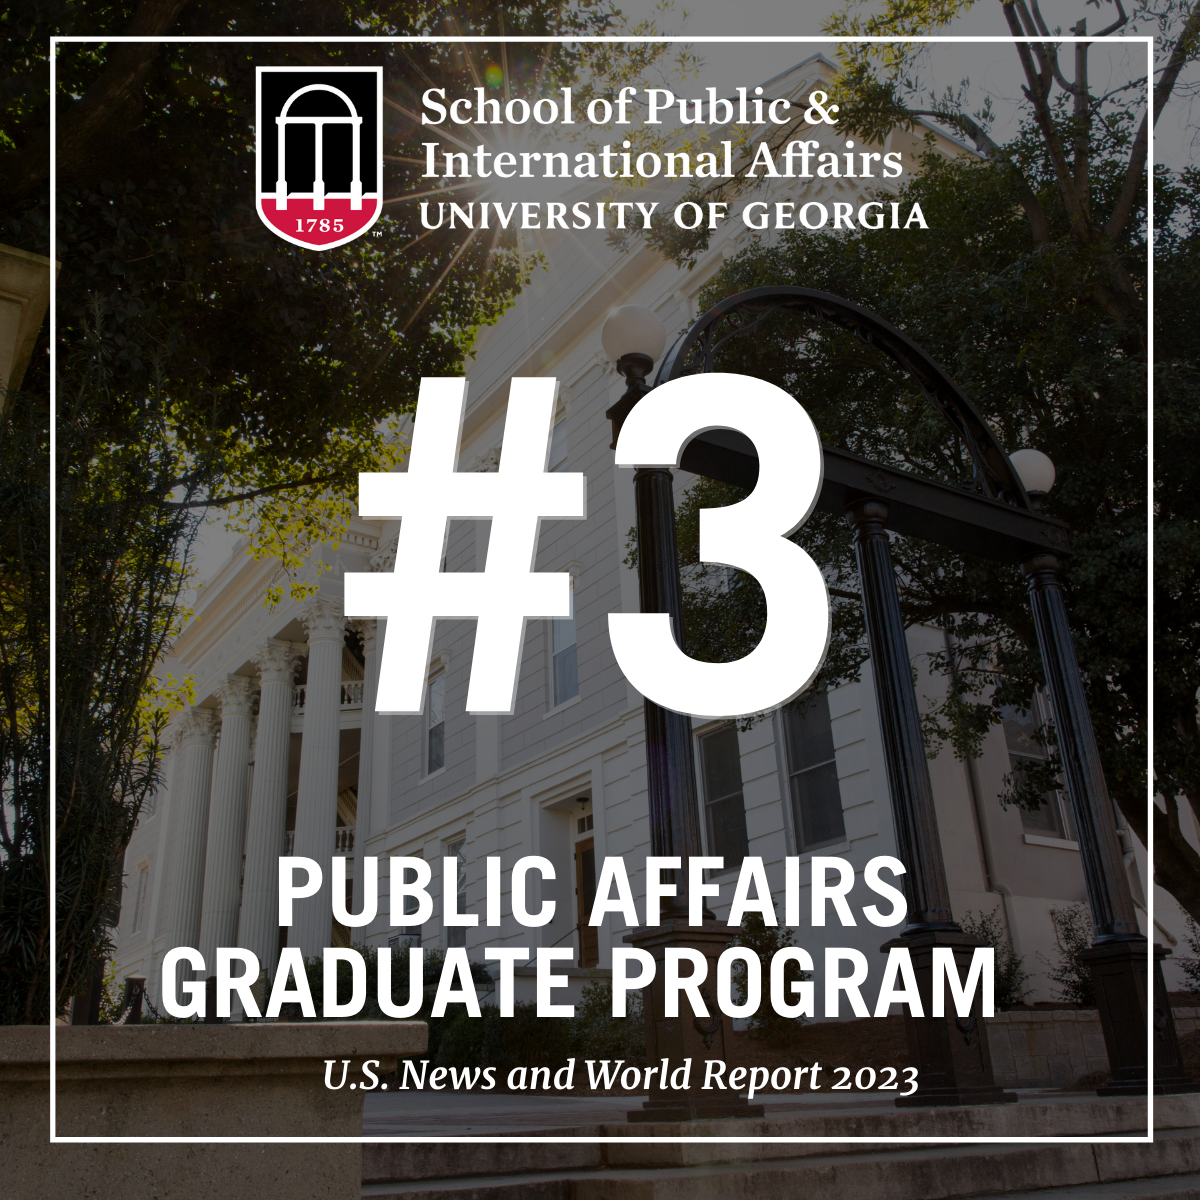 SPIA ranks #3 in the nation for Public Affairs Graduate Programs